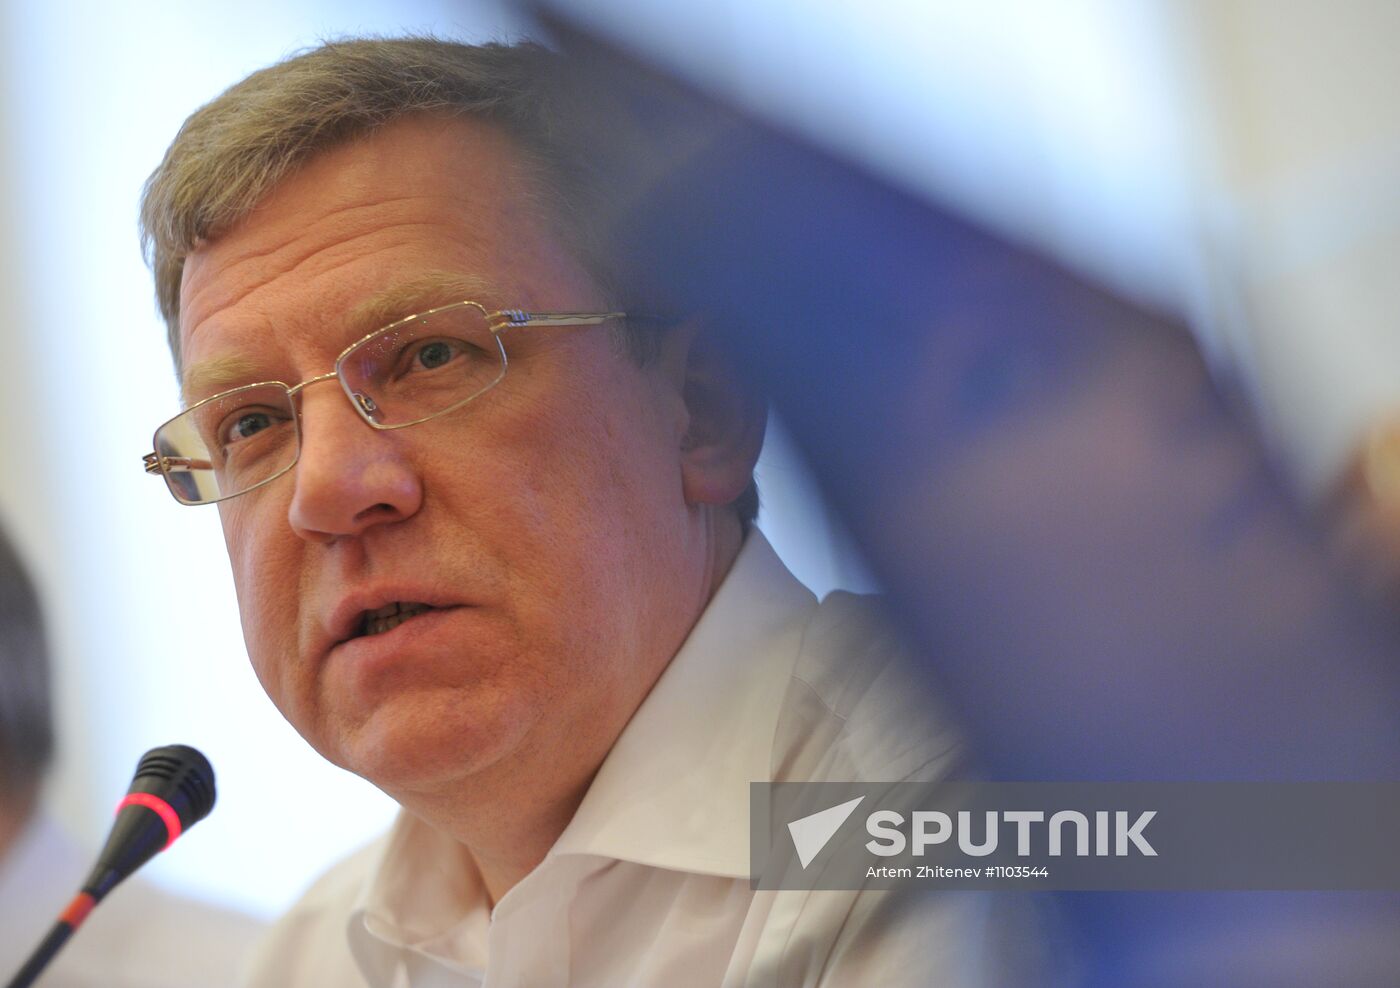 Alexei Kudrin gives lecture at Higher School of Economics